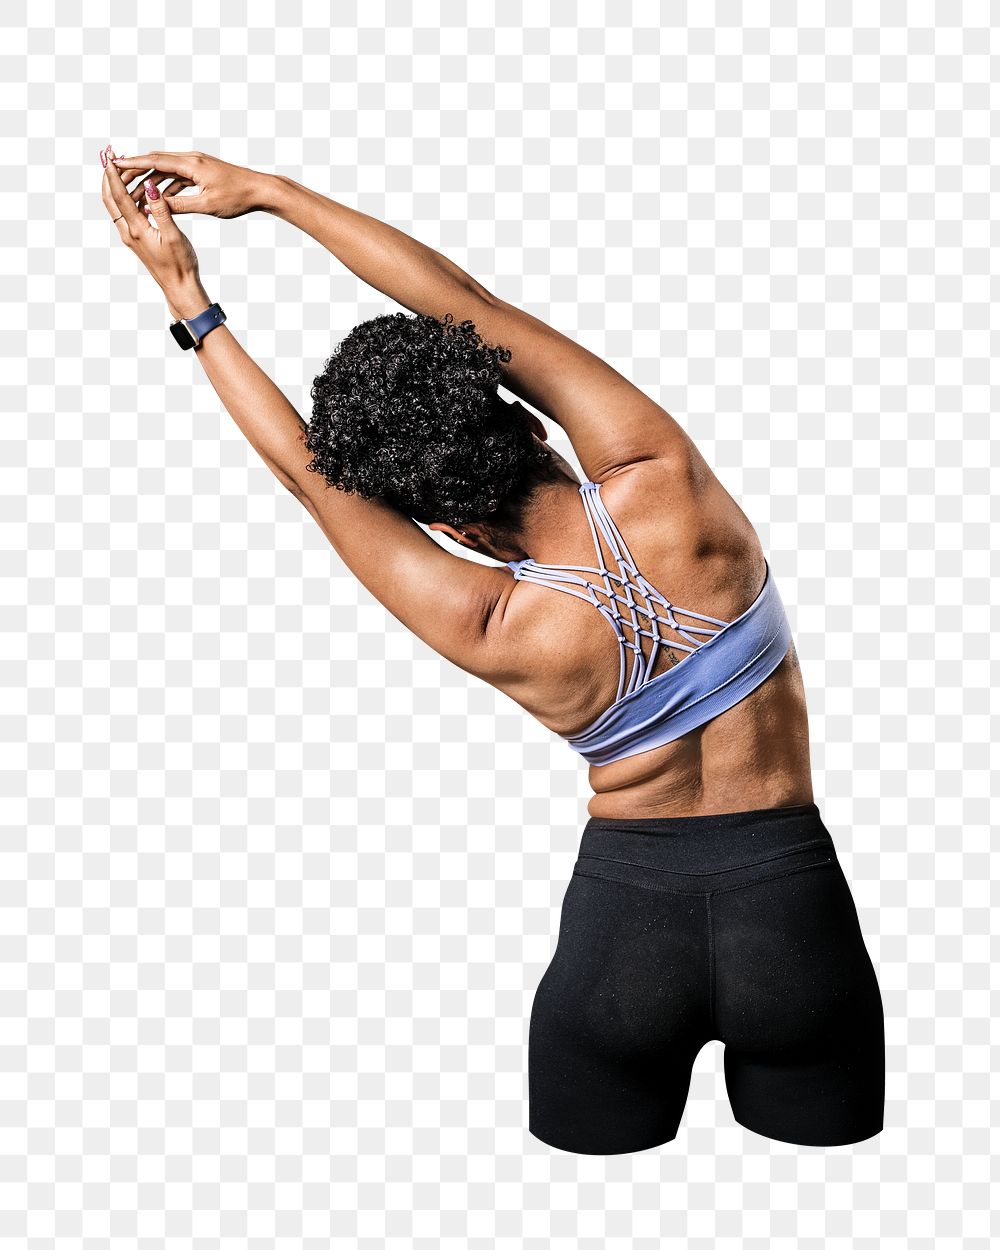 Healthy lifestyle yoga png, transparent background